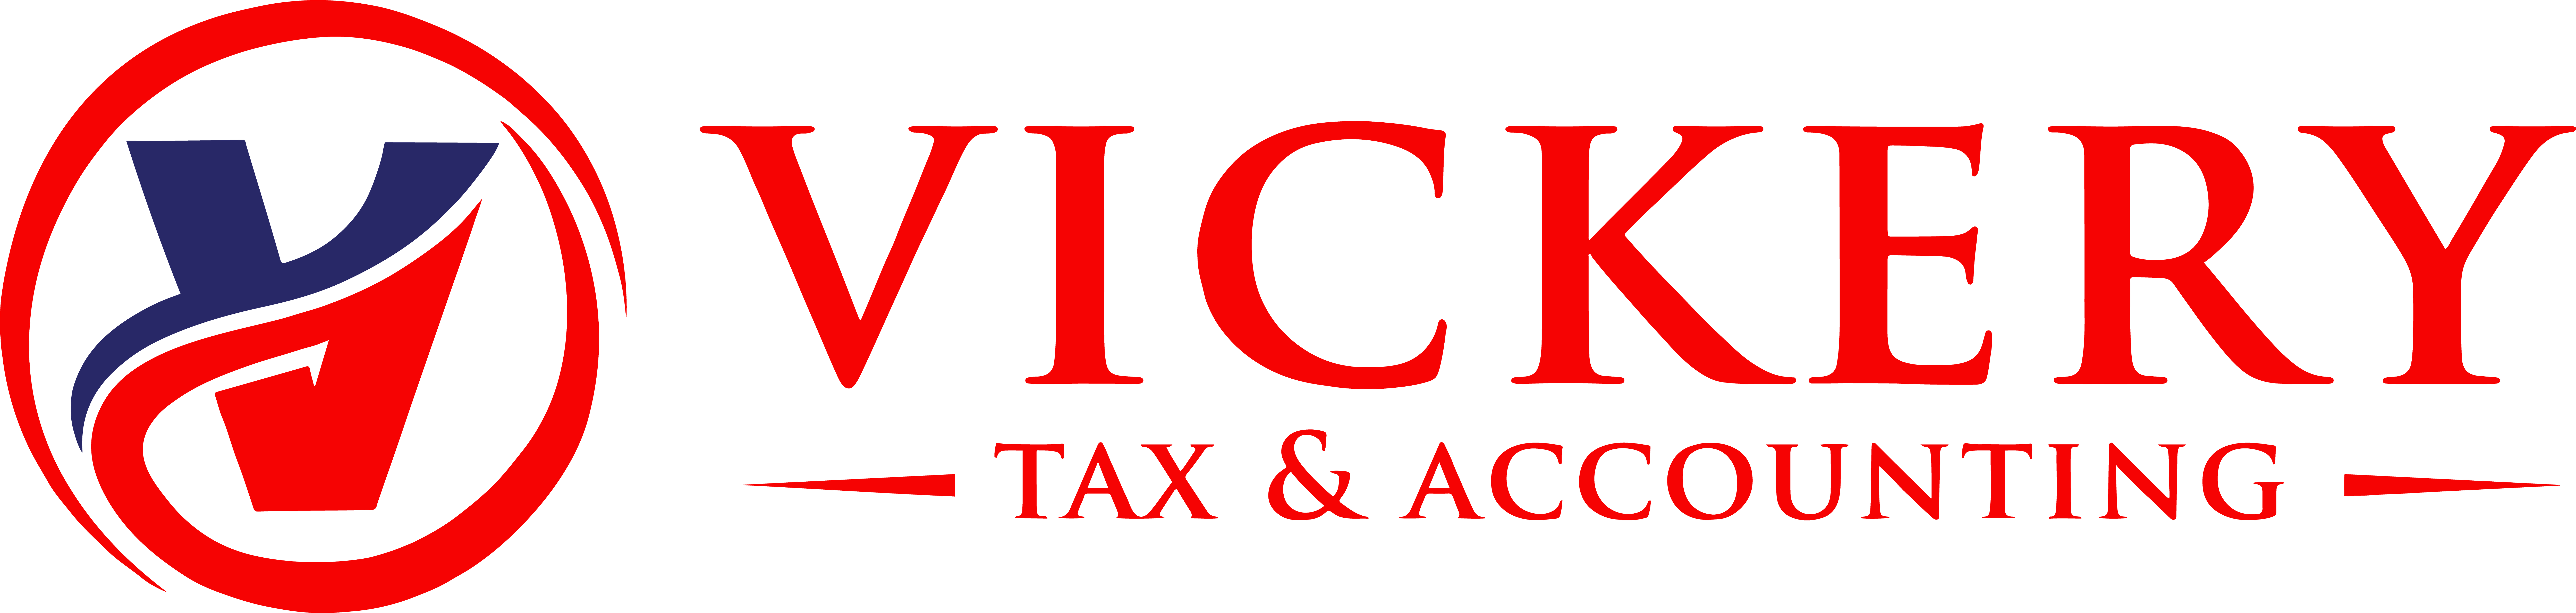 Vickery Tax and Accounting